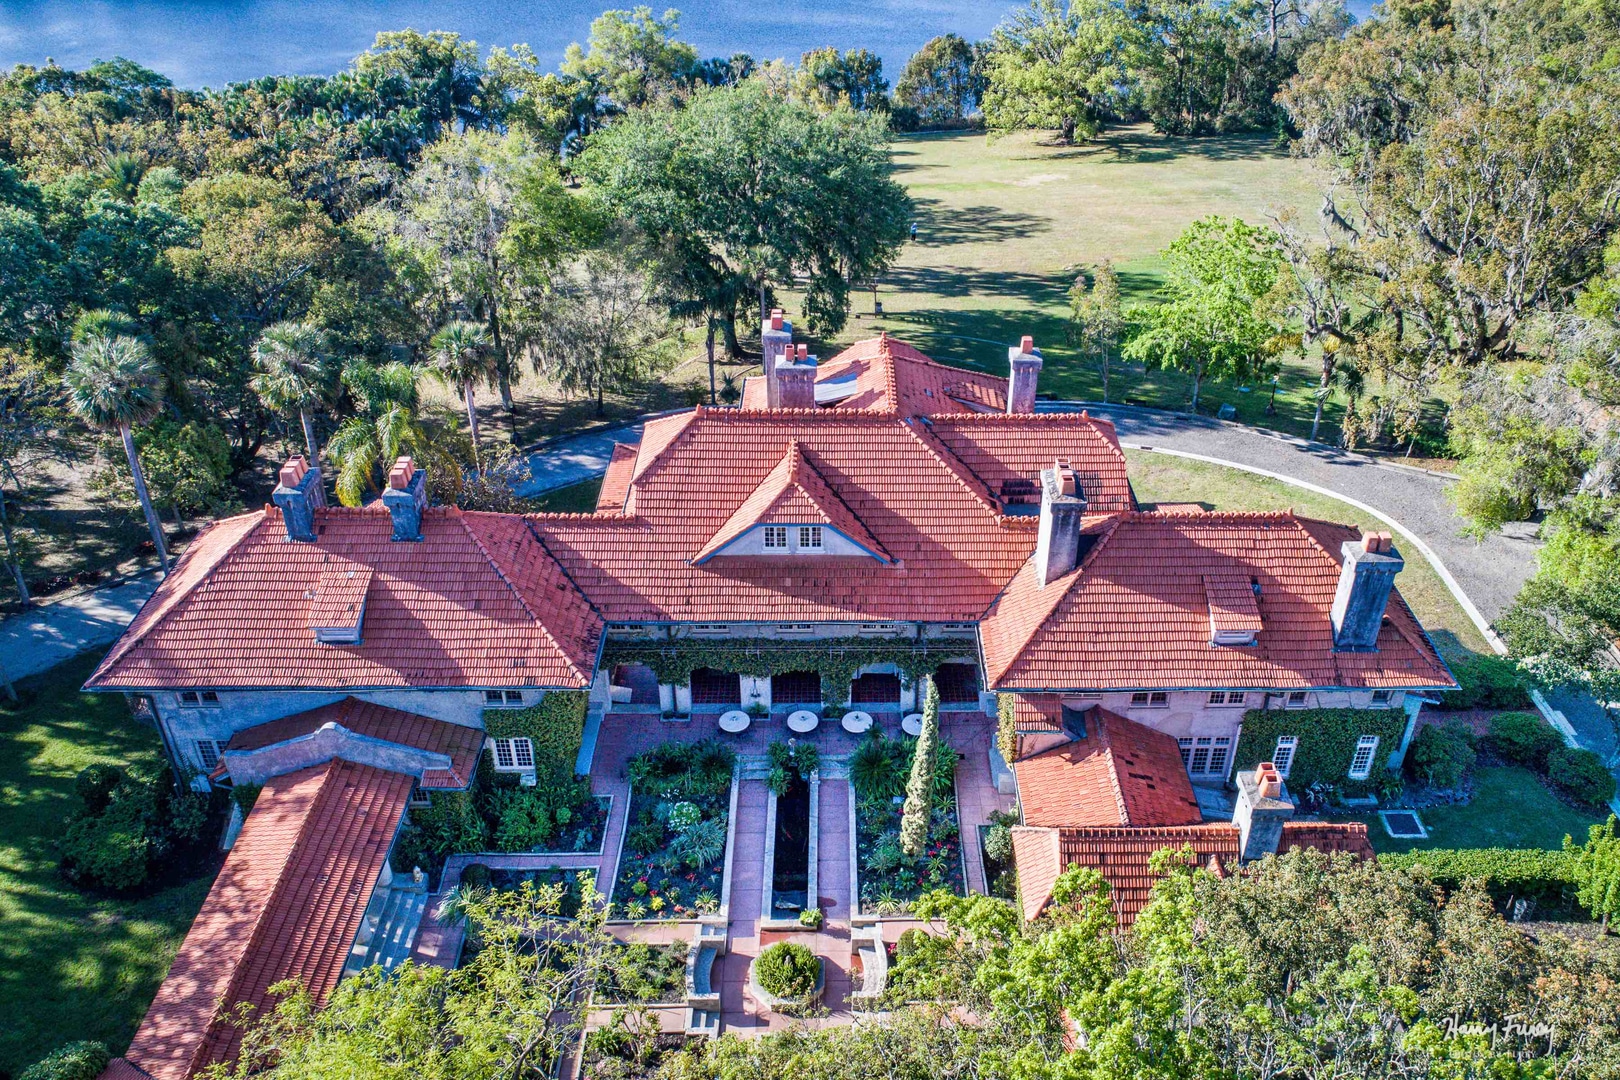 Sydonie Mansion - aerial shot of old mansion with Spanish tile roof